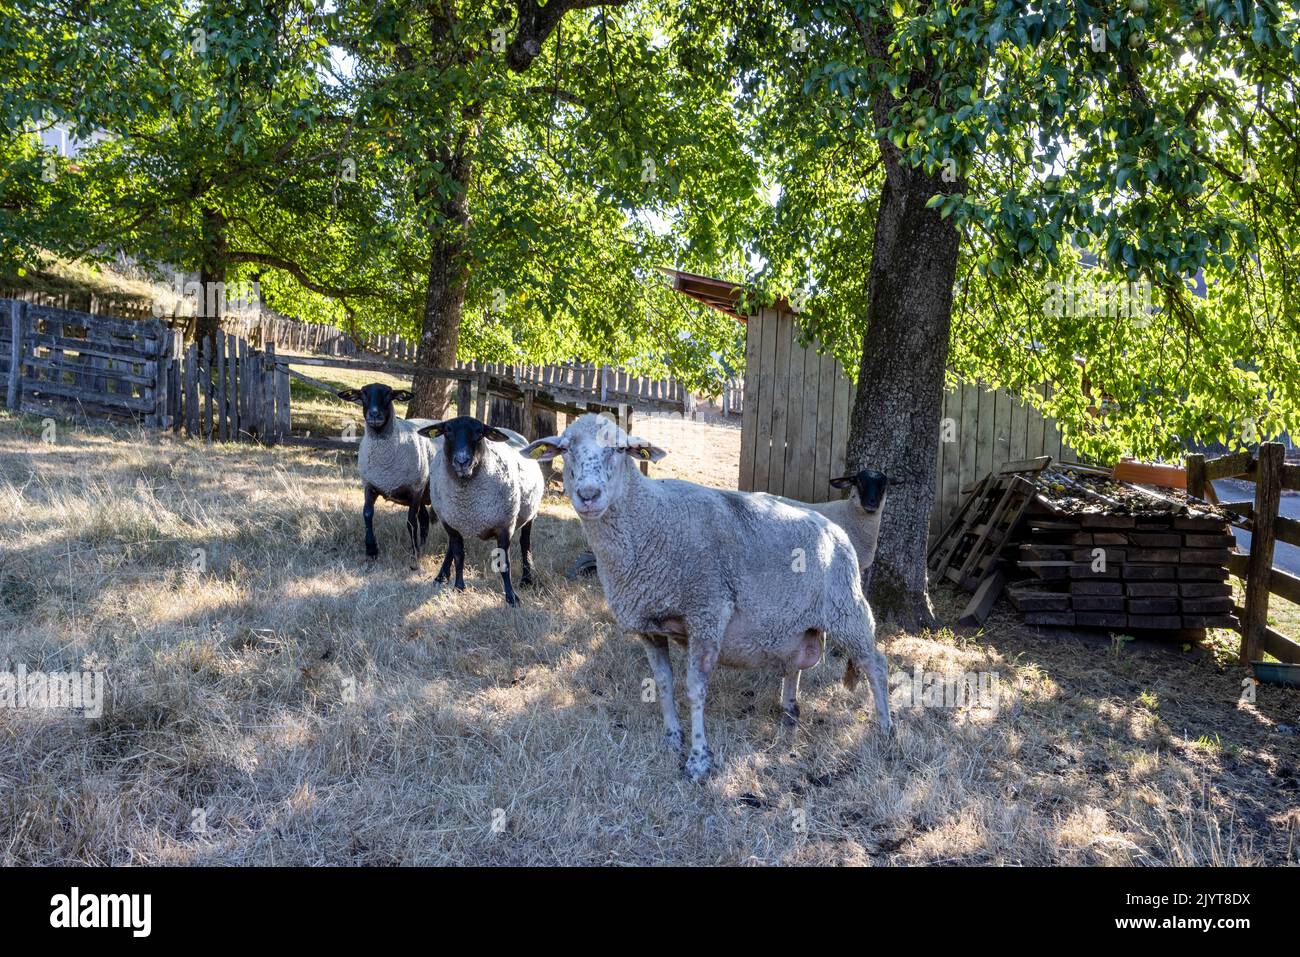 Sheep in a private garden, summer, Moselle, France Stock Photo